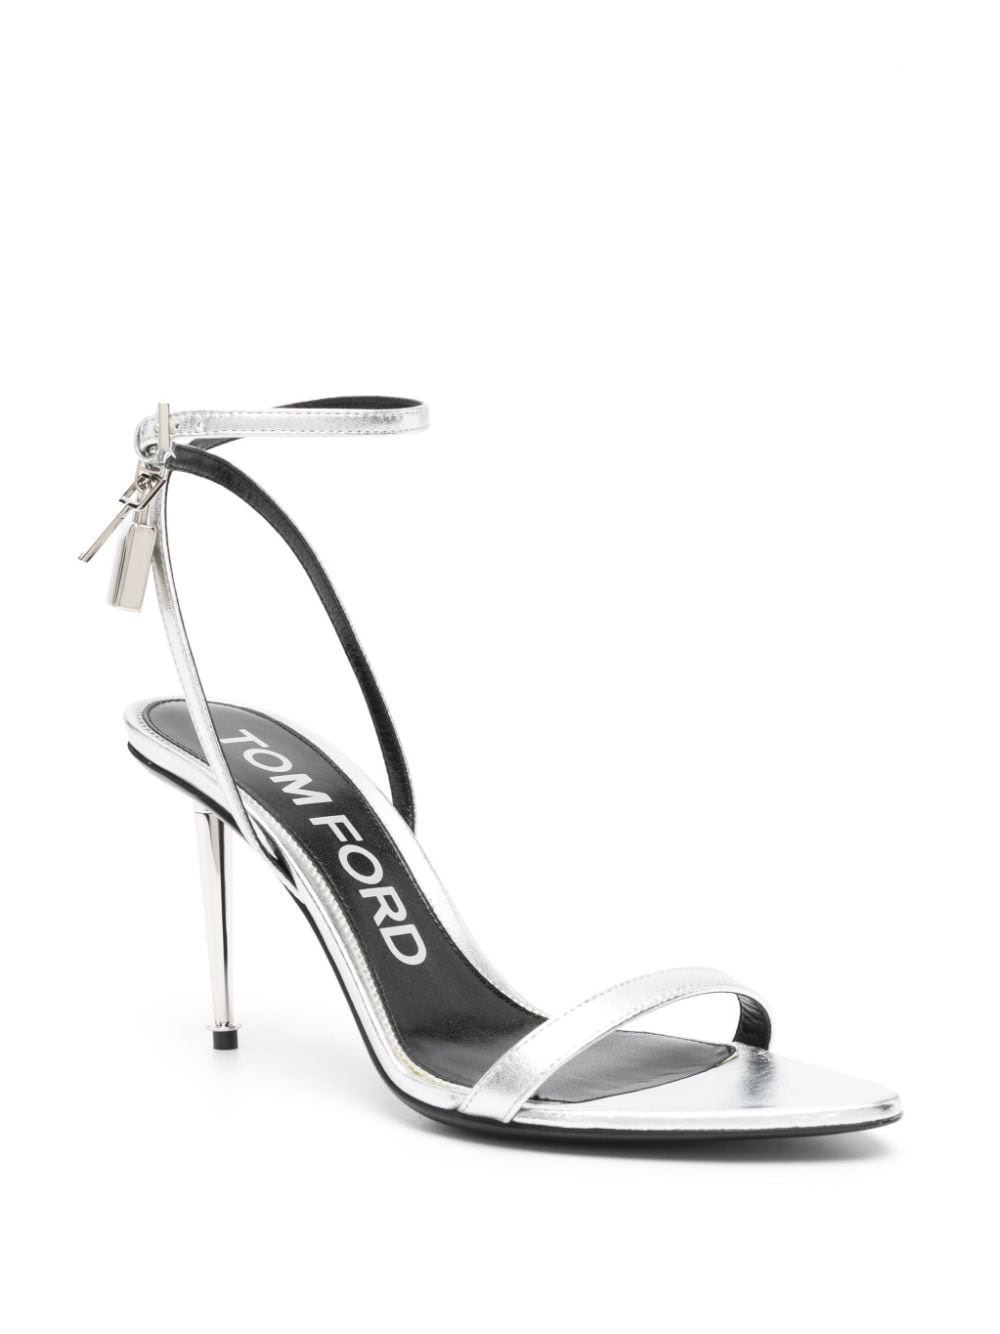 TOM FORD Padlock Pointy Naked 85mm Leather Sandals - Farfetch